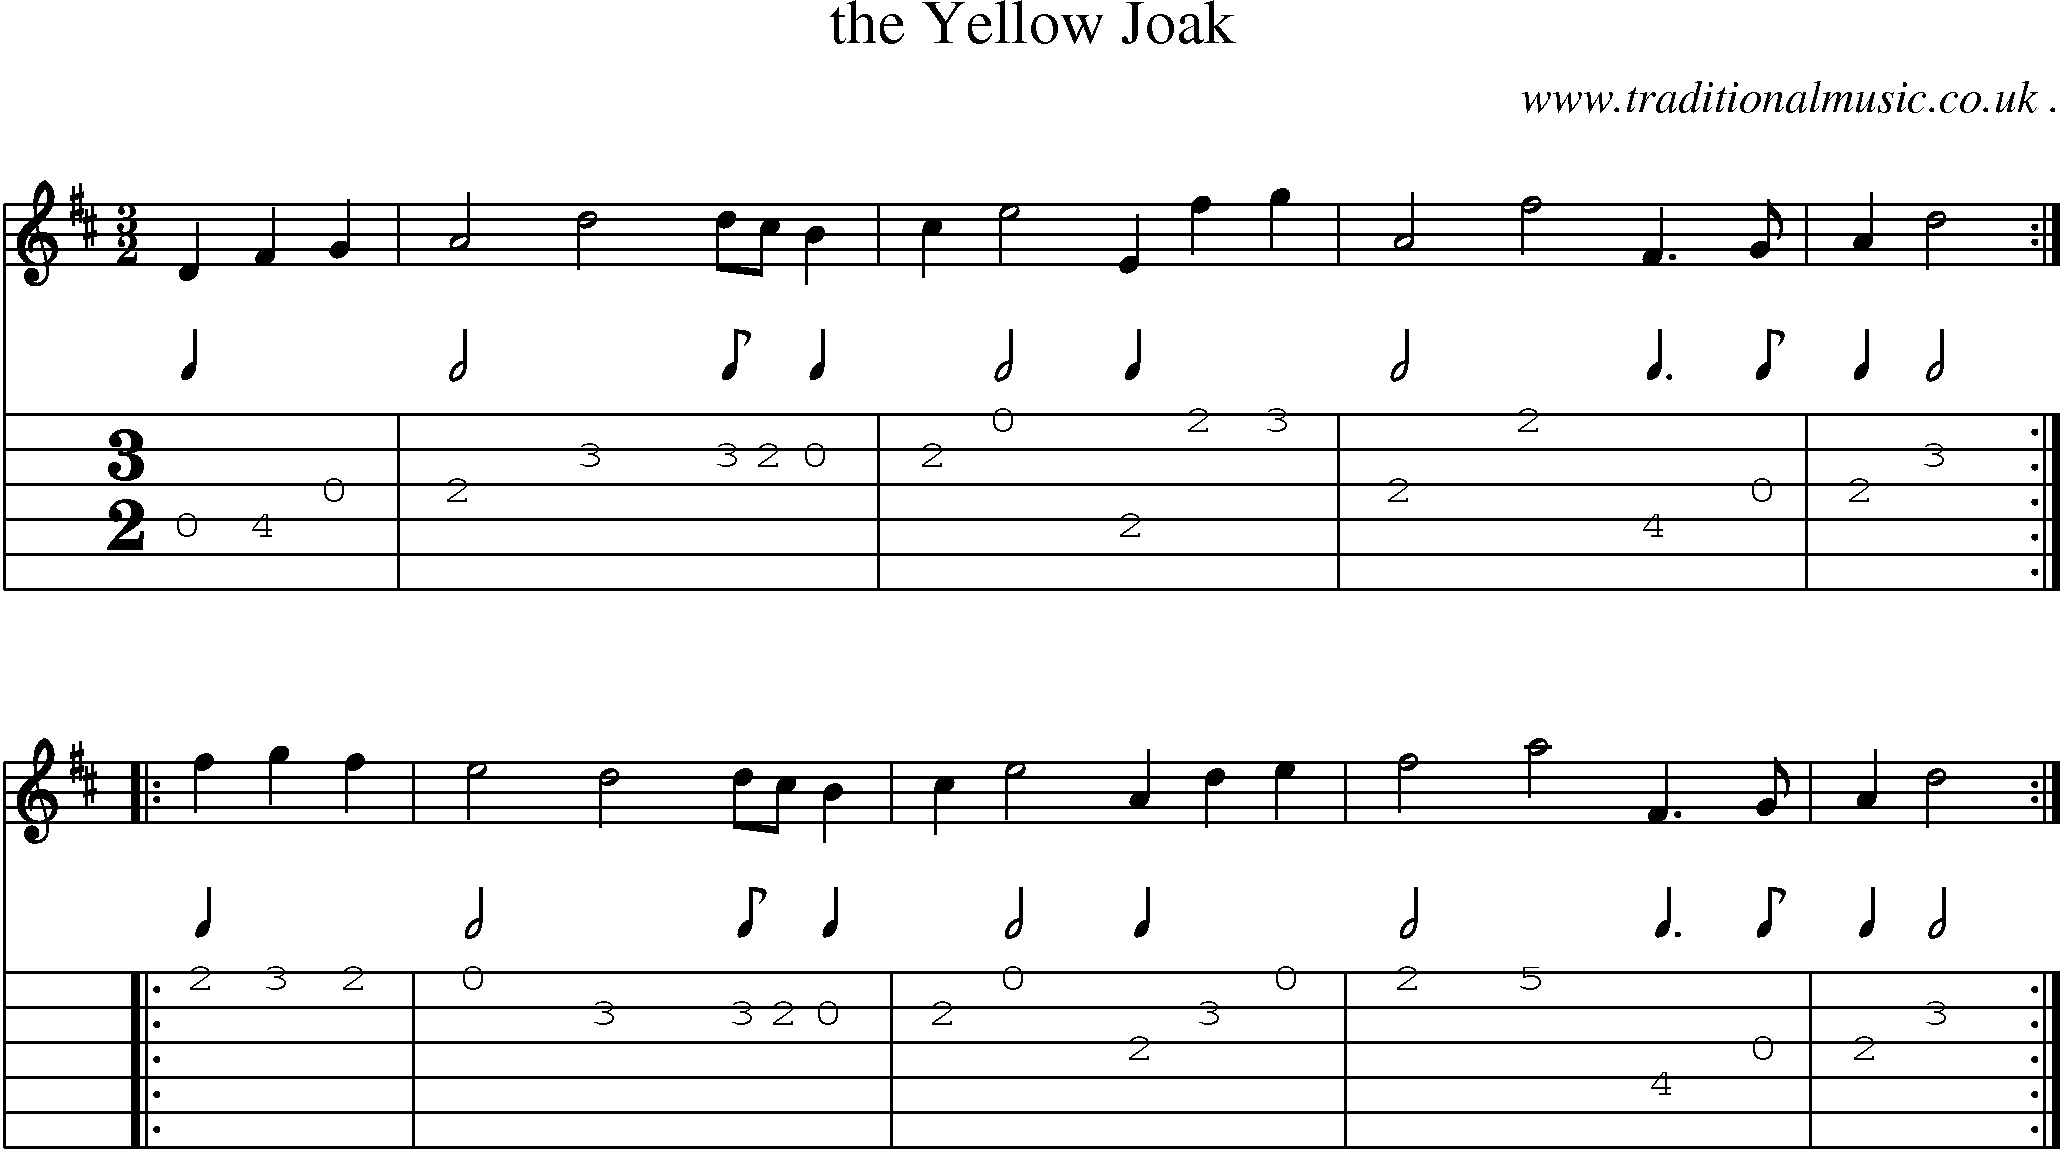 Sheet-Music and Guitar Tabs for The Yellow Joak